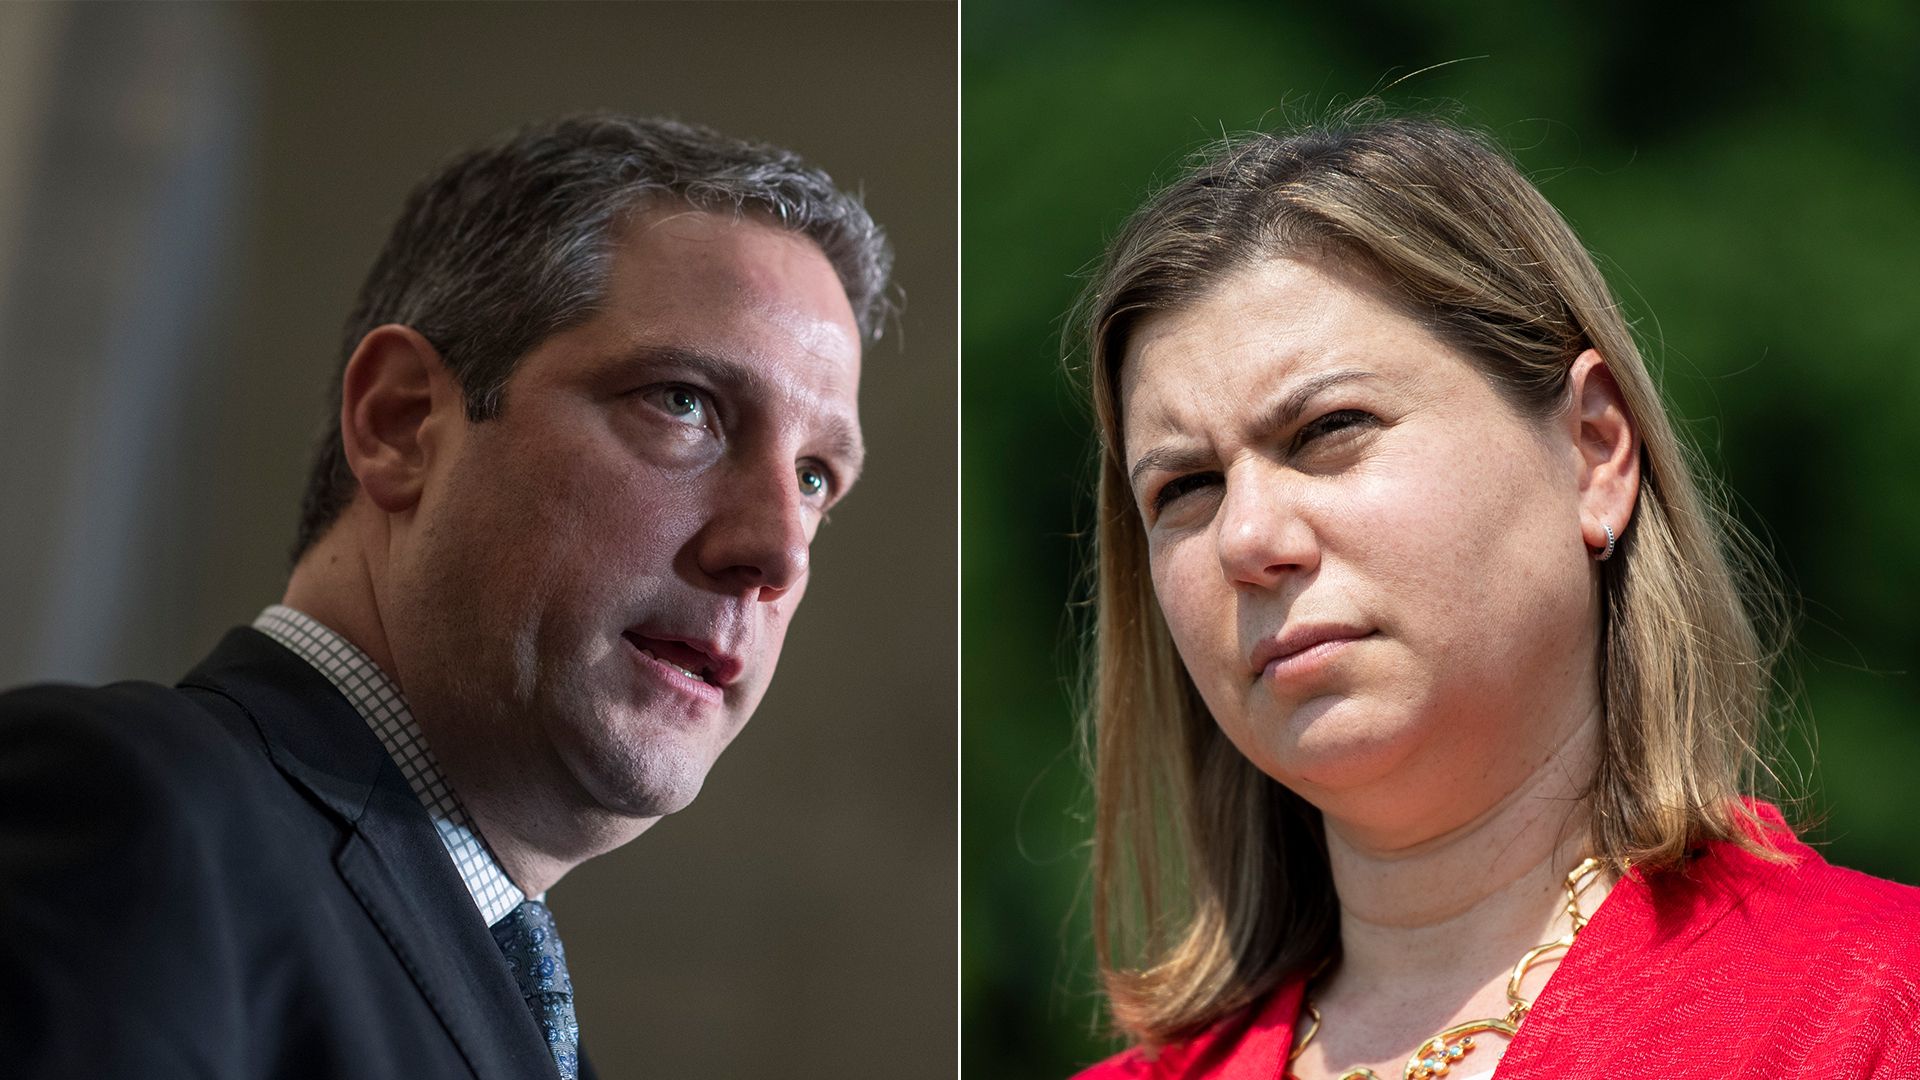 A compilation shows Reps. Tim Ryan and Elissa Slotkin.